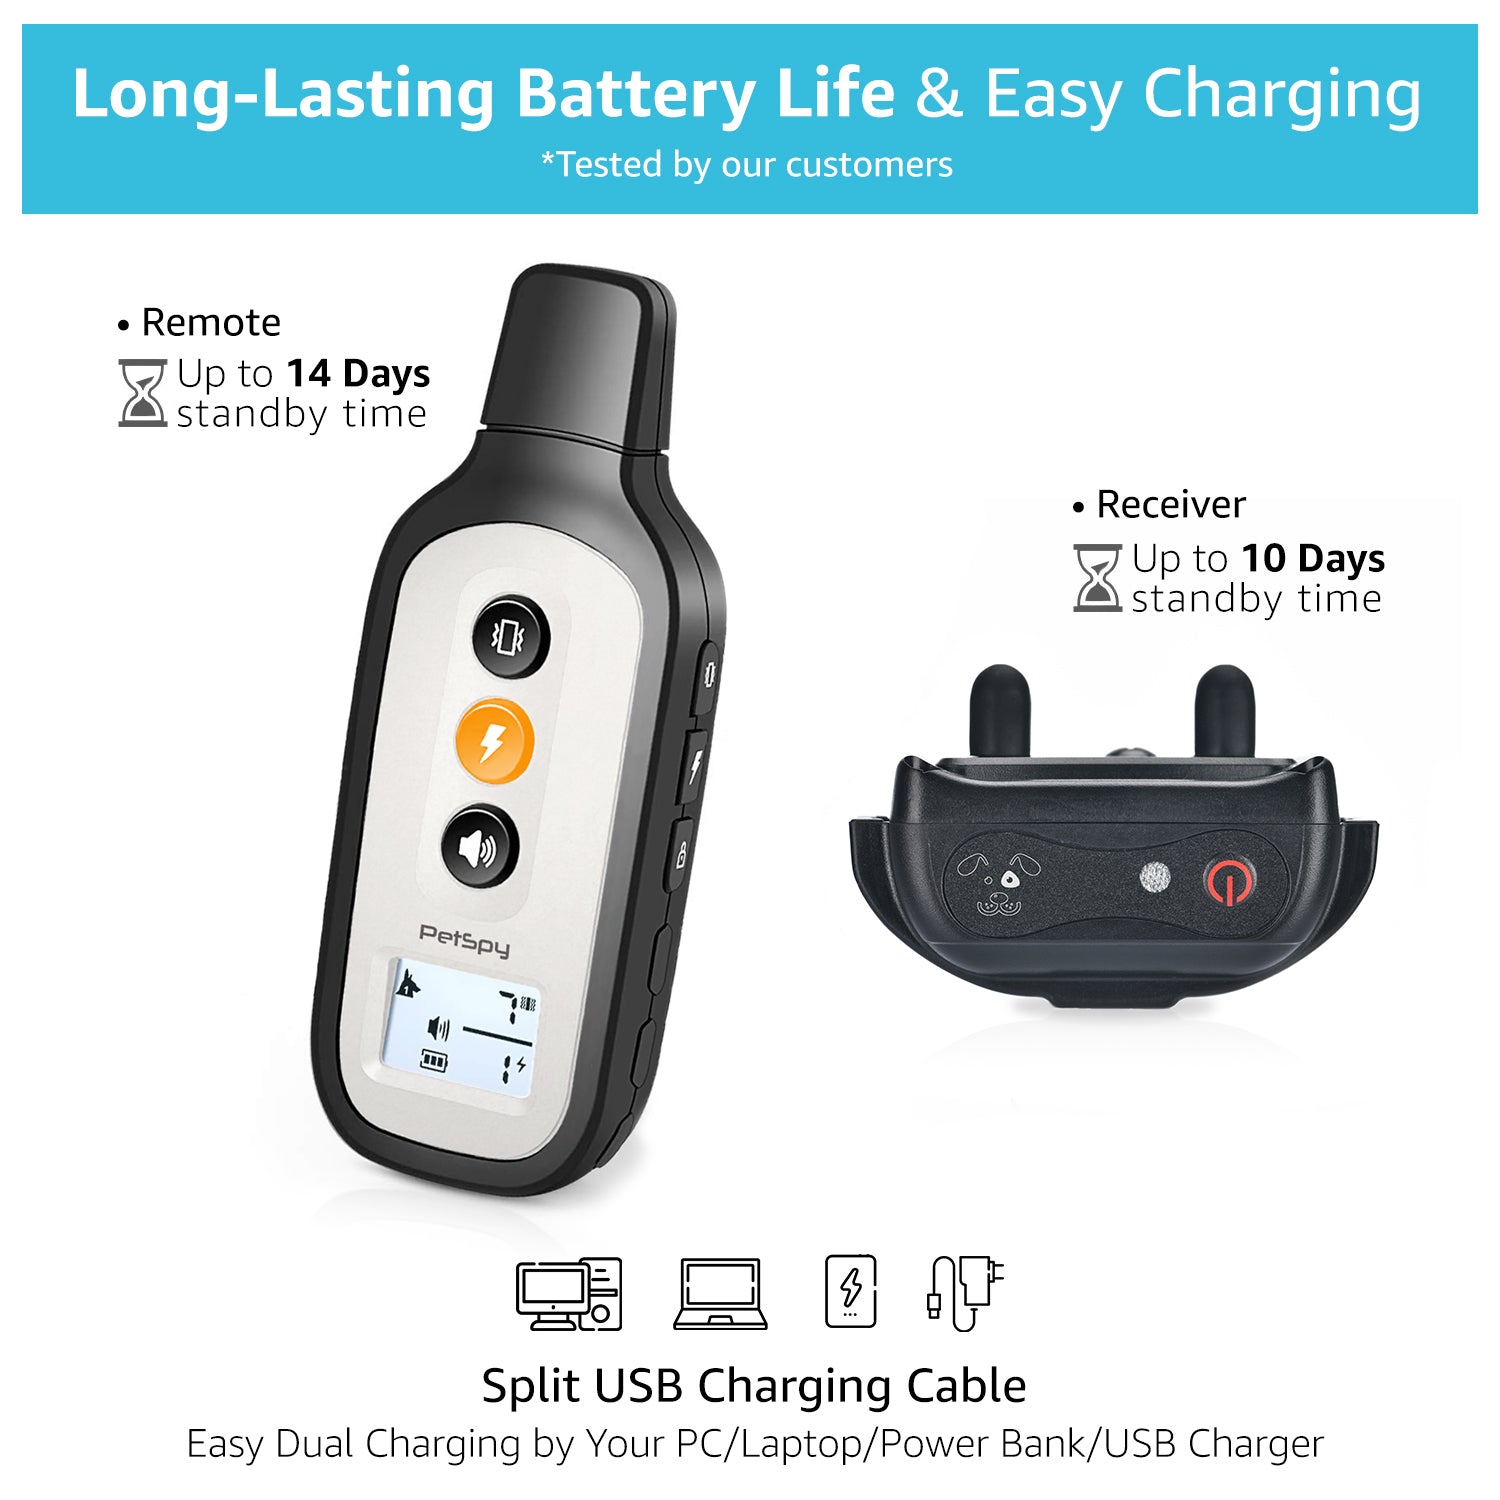 long-lasting battery and easy charging